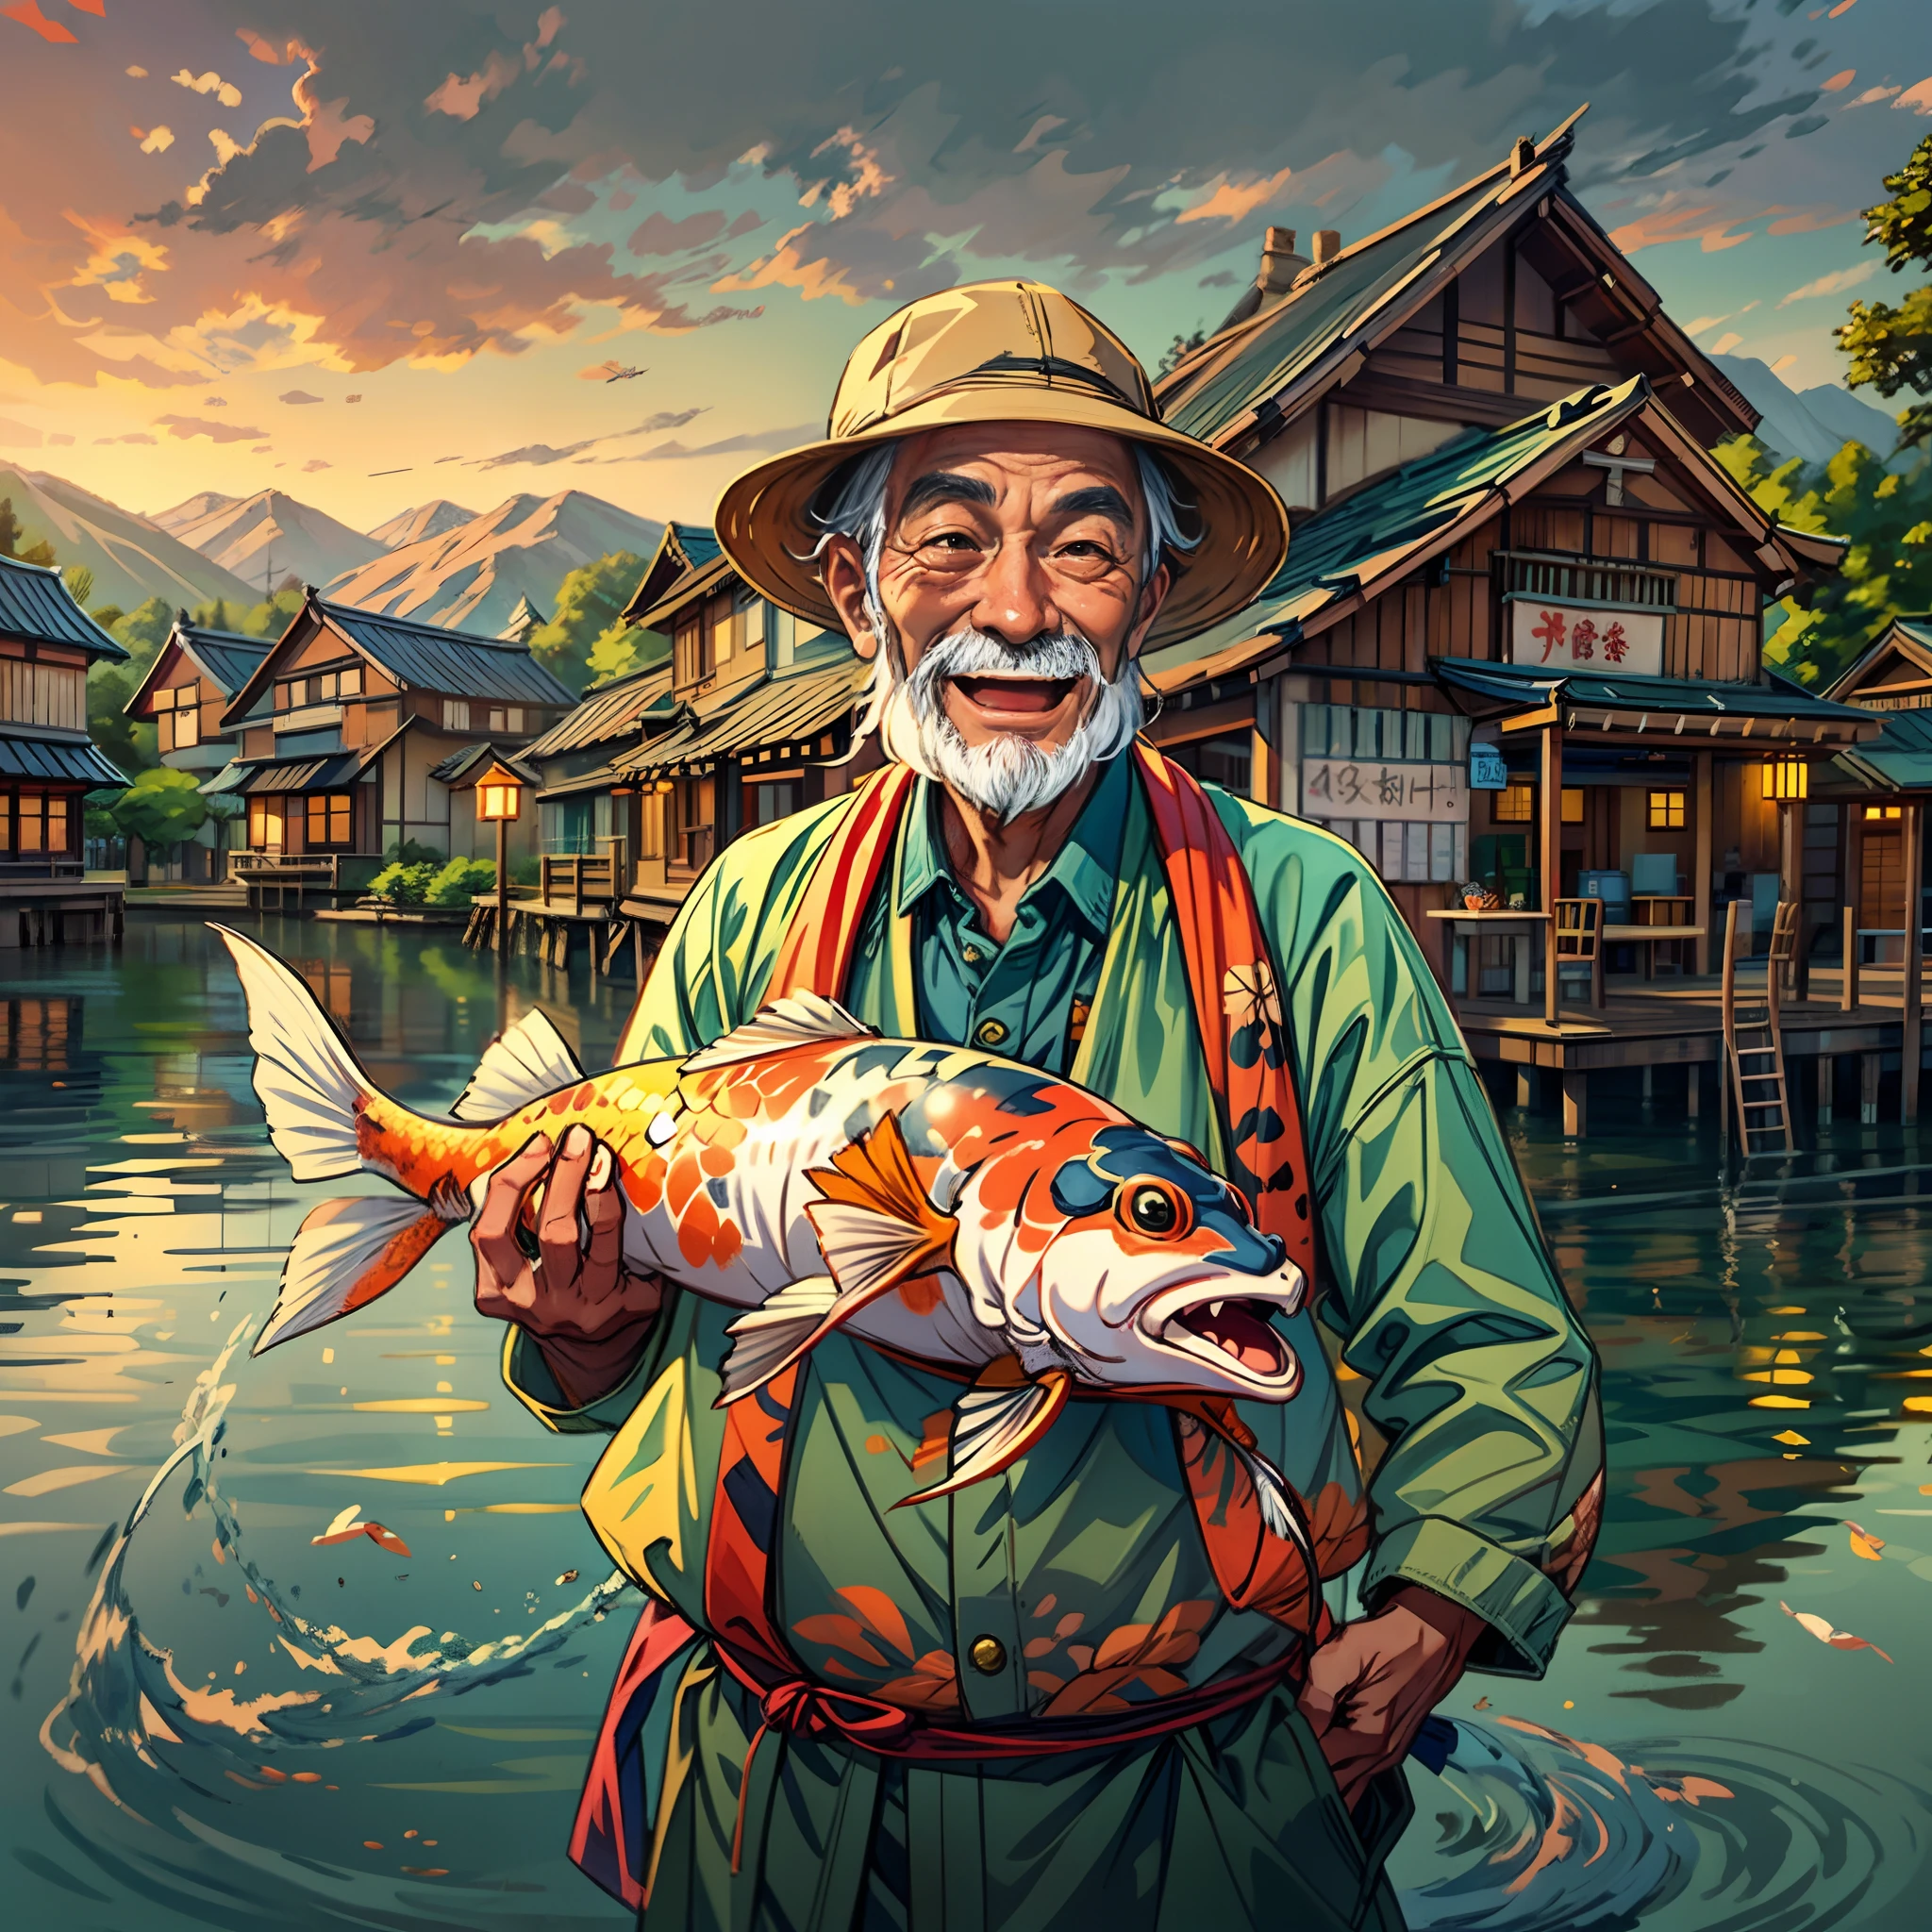 closeup, front view of a happy old fisherman holding a (big:1.2) Koi Fish, simple clothing, hat, fascinating evening village backdrop